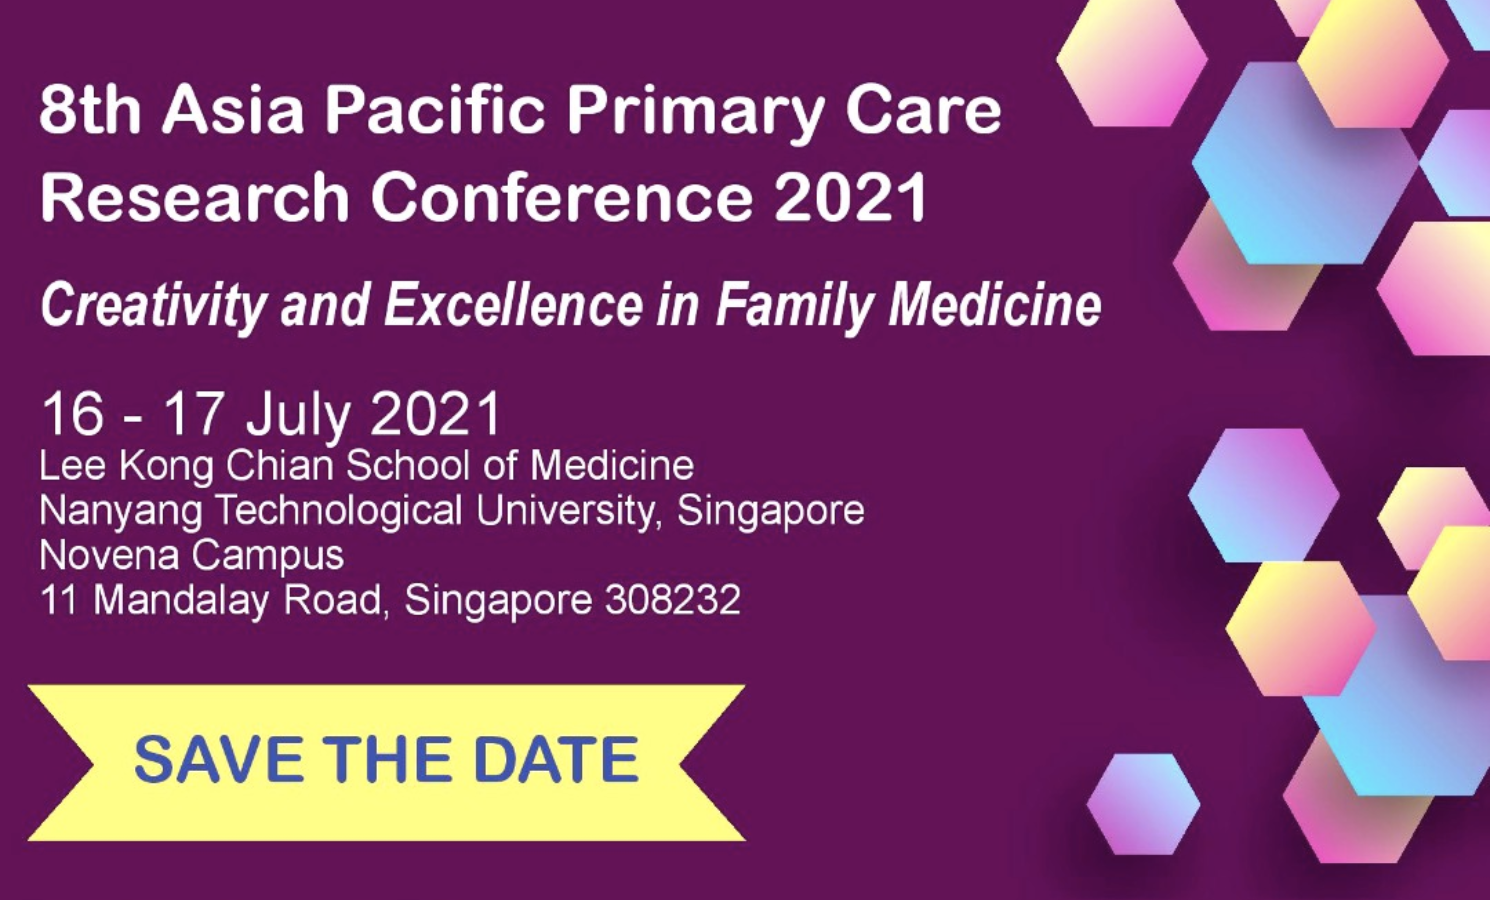 8th Asia Pacific Primary Care Research Conference 2021 Lee Kong Chian